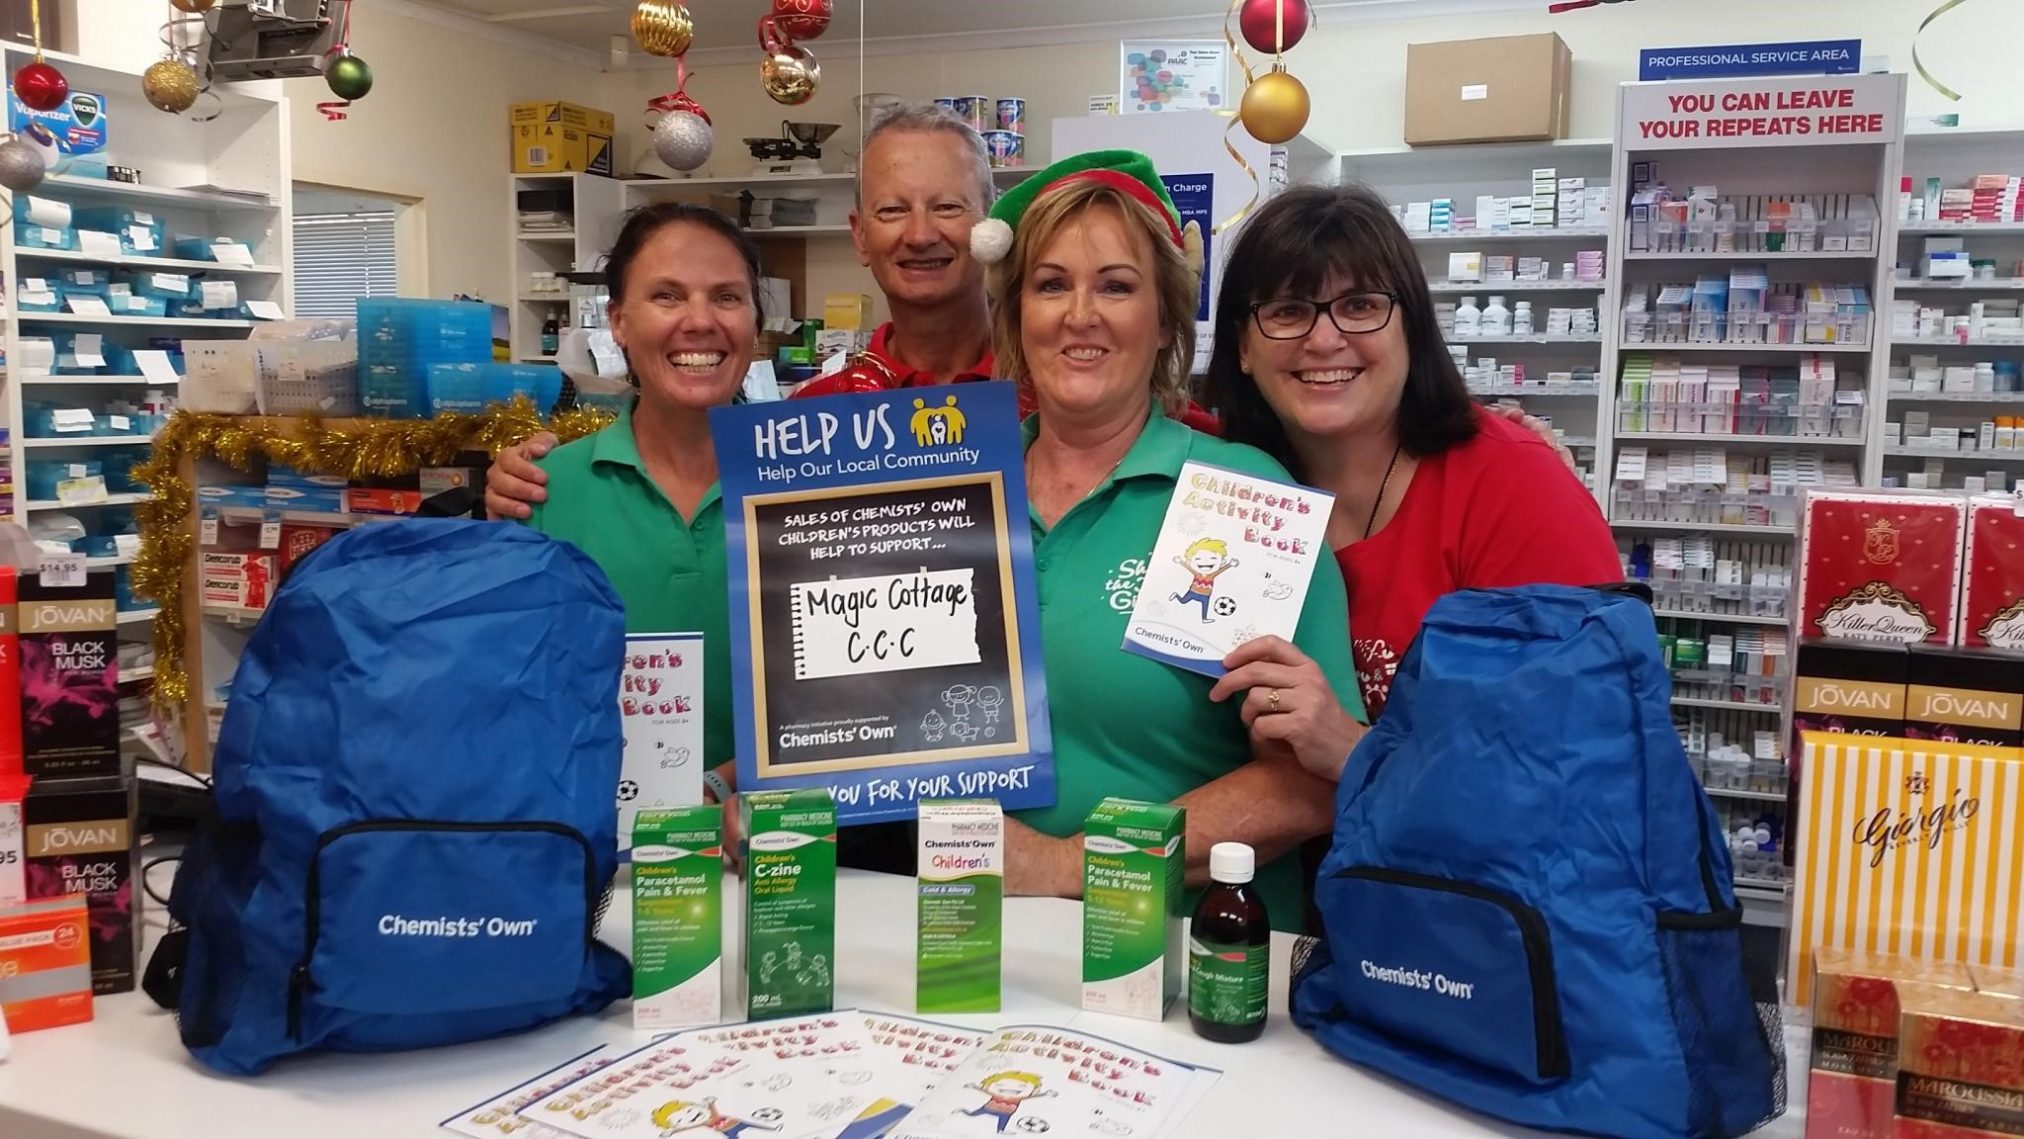 Rangeway Guardian Pharmacy in WA, whose local childcare centre is Magic Cottage Child Care Centre.